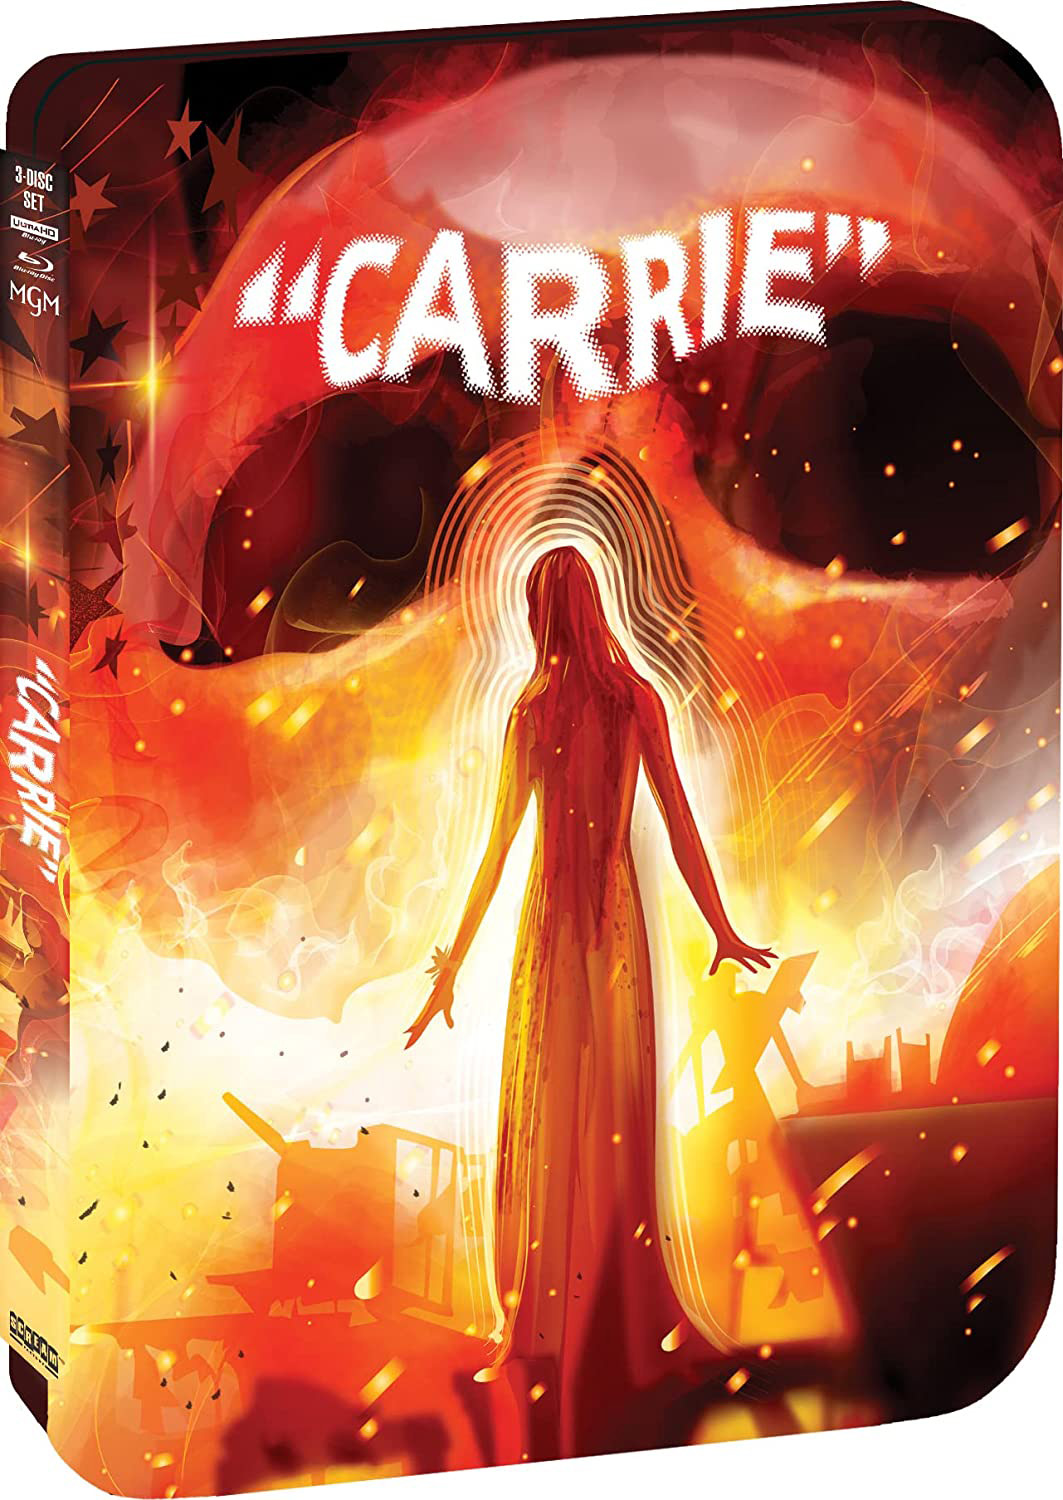 'Carrie' Limited-Edition Steelbook